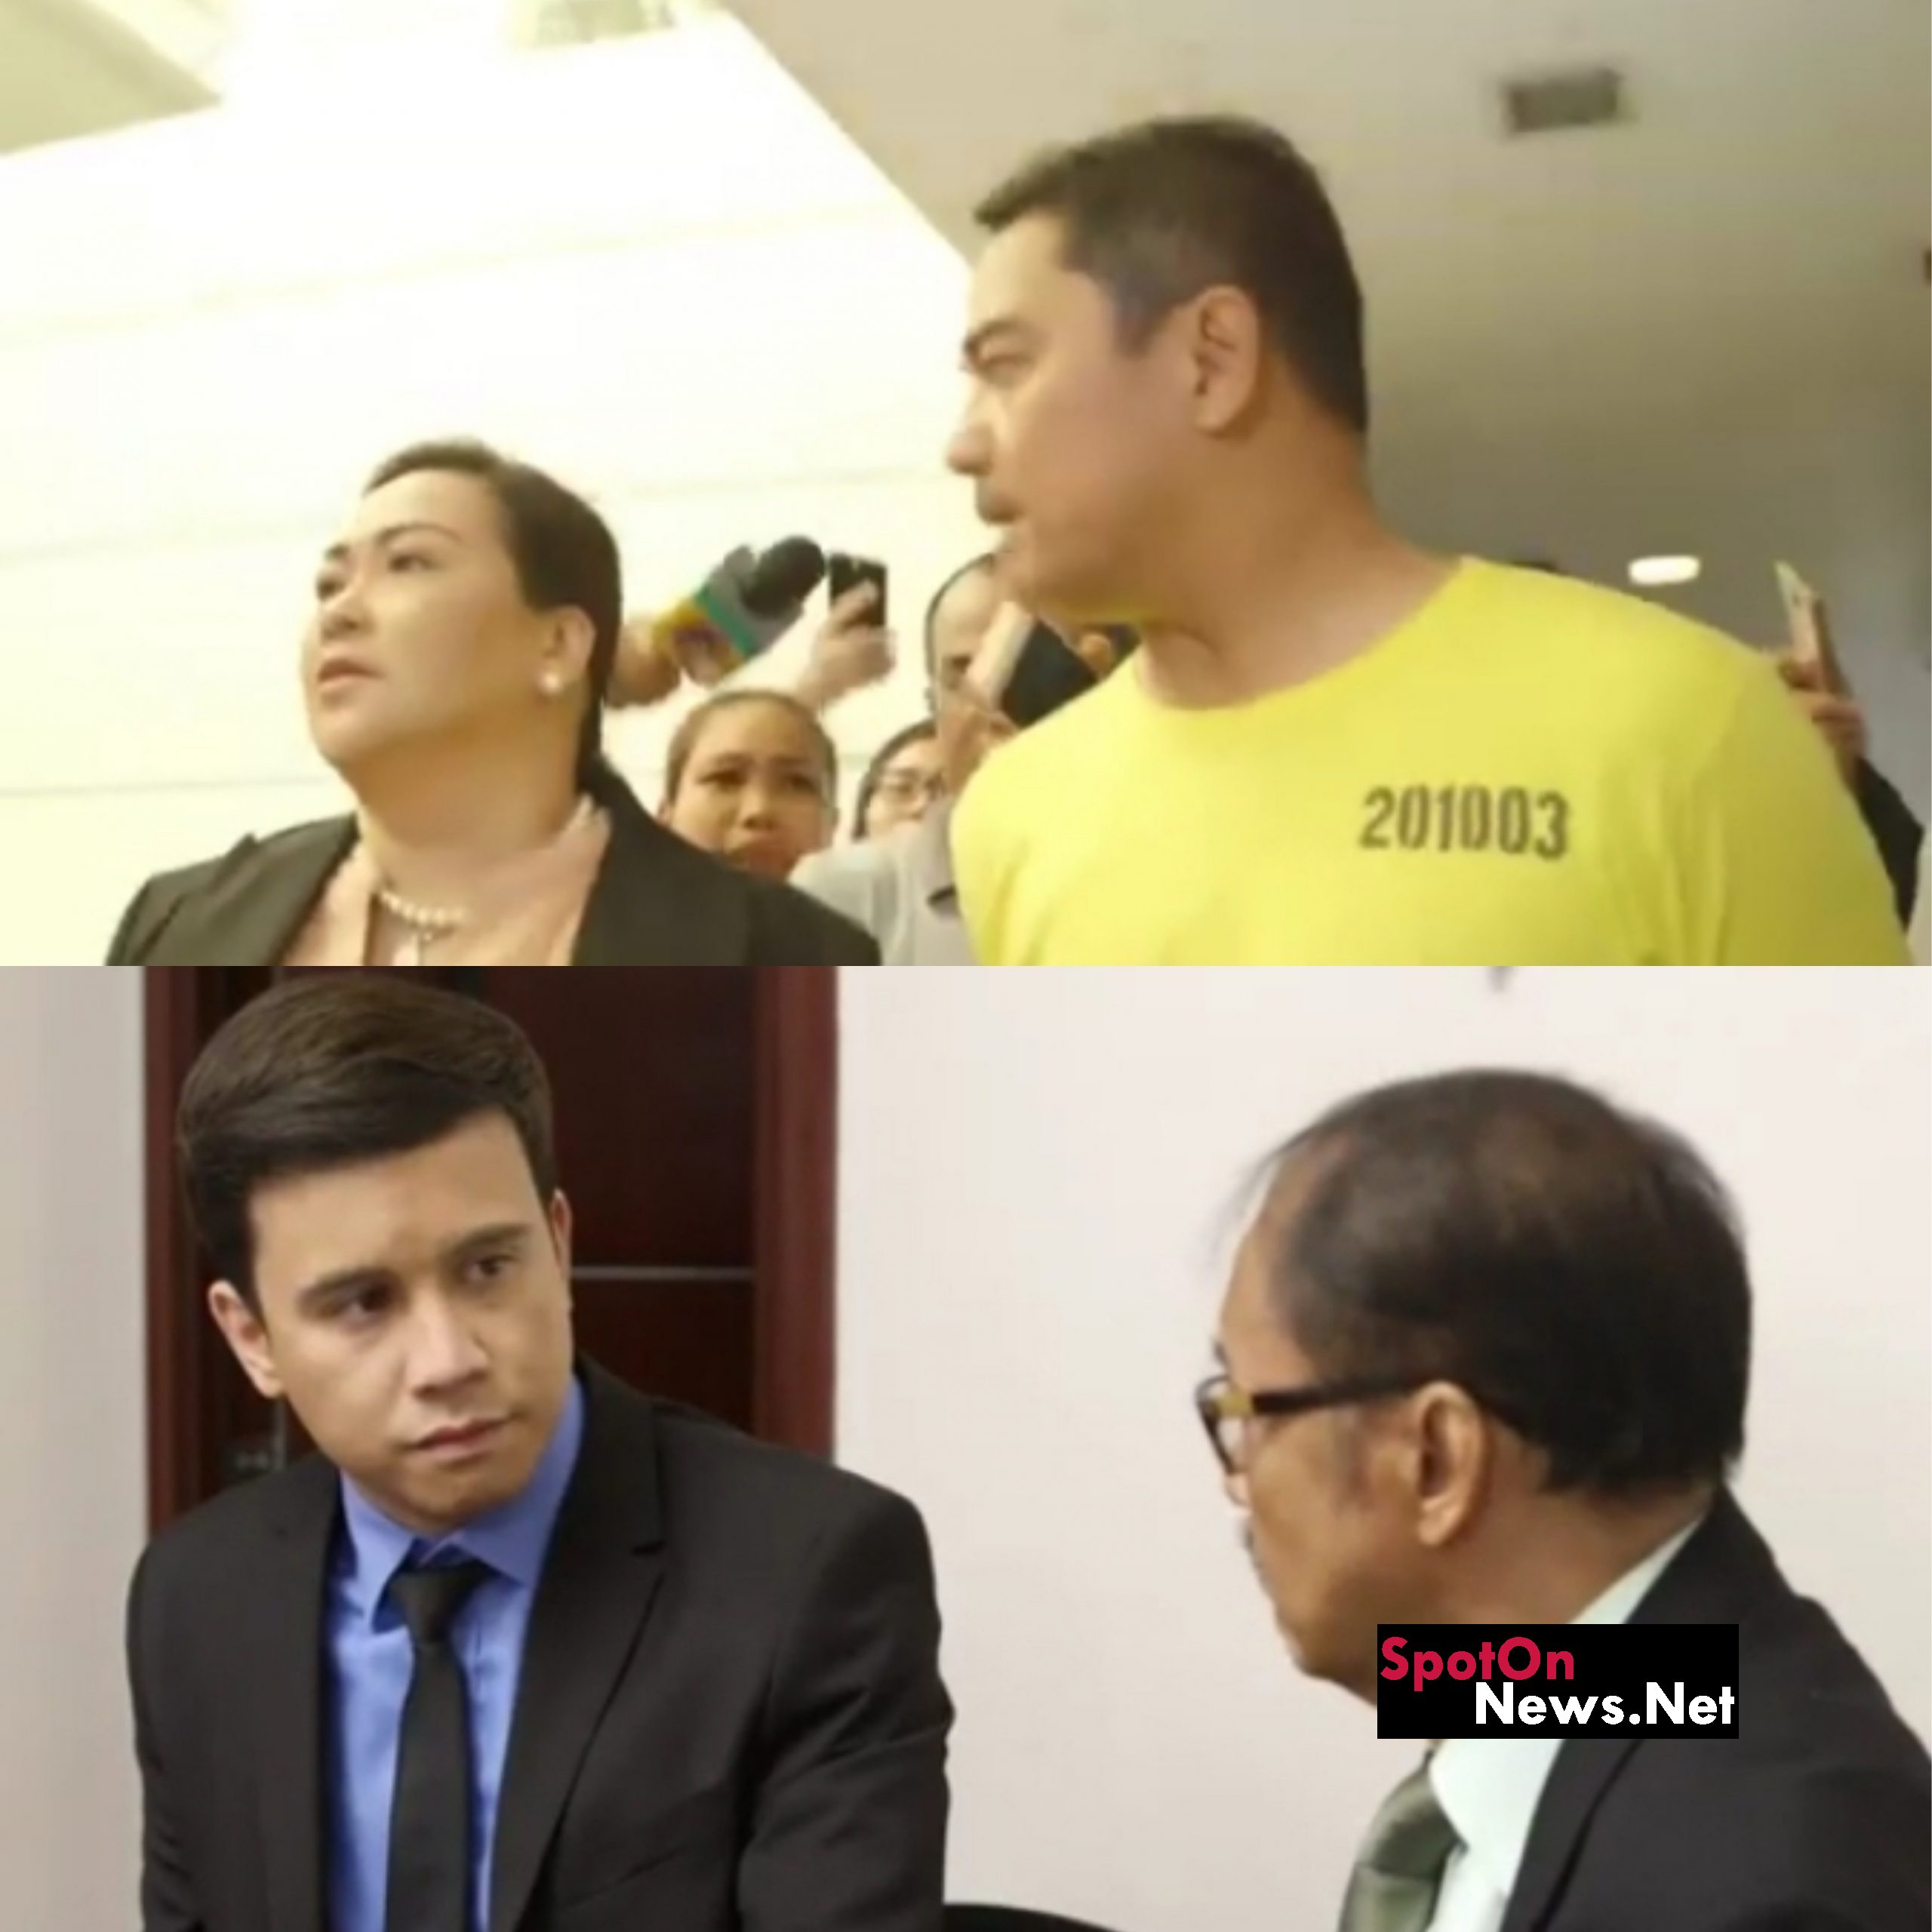 A Mother's Guilt Episode 50 Jacob cries as his father forms alliance with Atty Vega to cage him forever